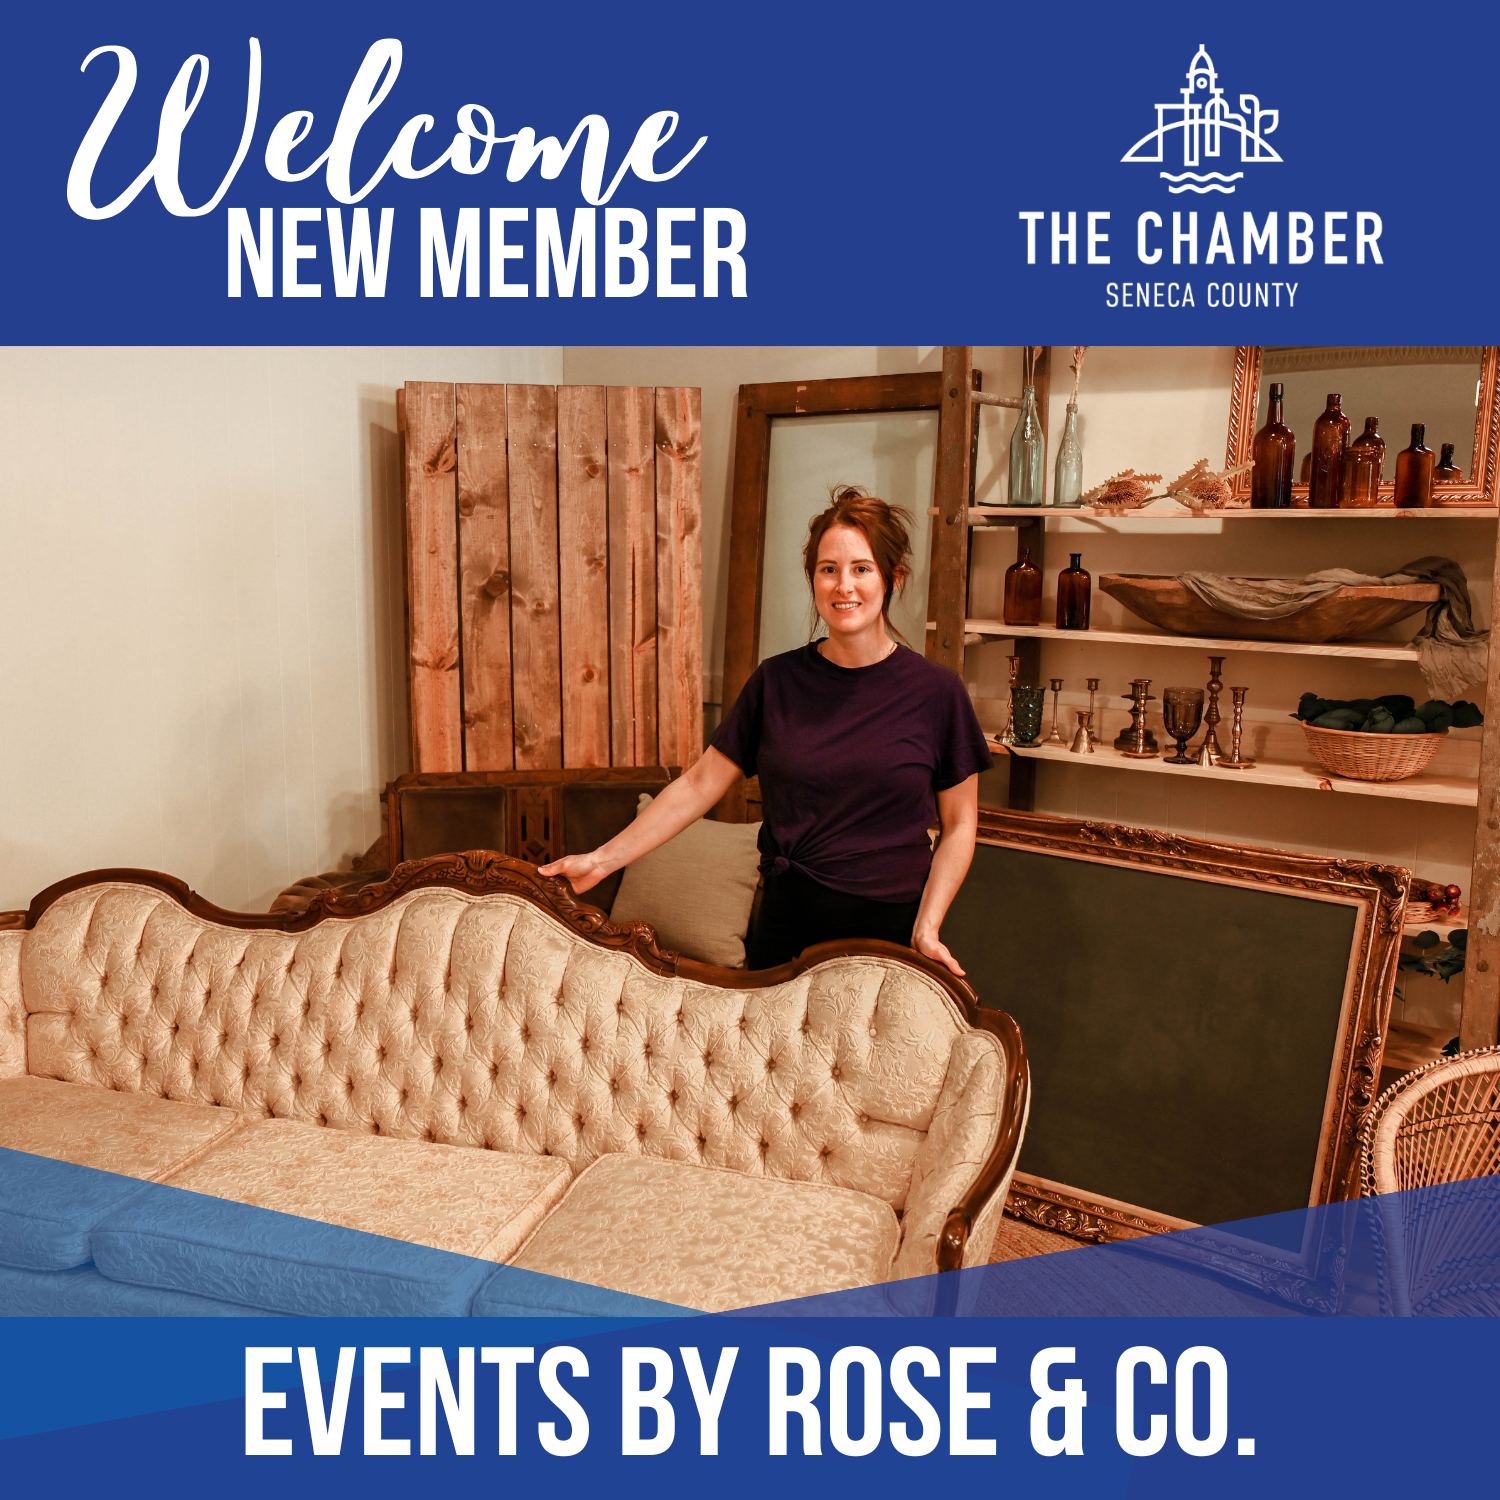 New Member: Events by Rose & Co.